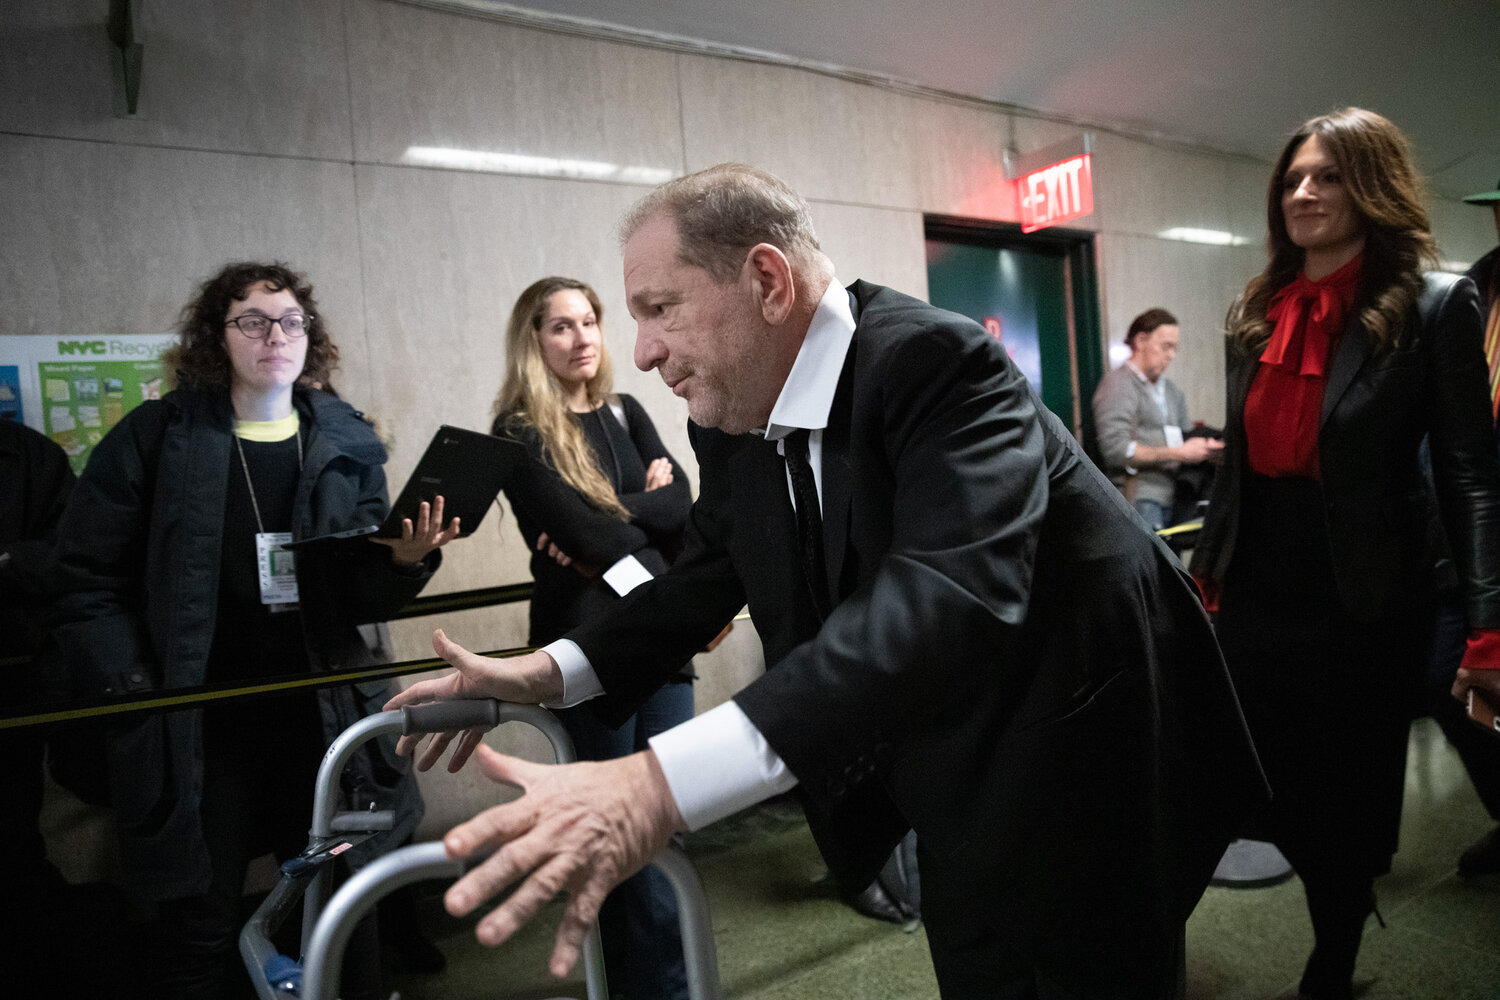  Hollywood film producer Harvey Weinstein leaves court in New York on Jan. 10, 2020, after attending jury selection for his sexual assault trial. (AP Photo/Mark Lennihan) 